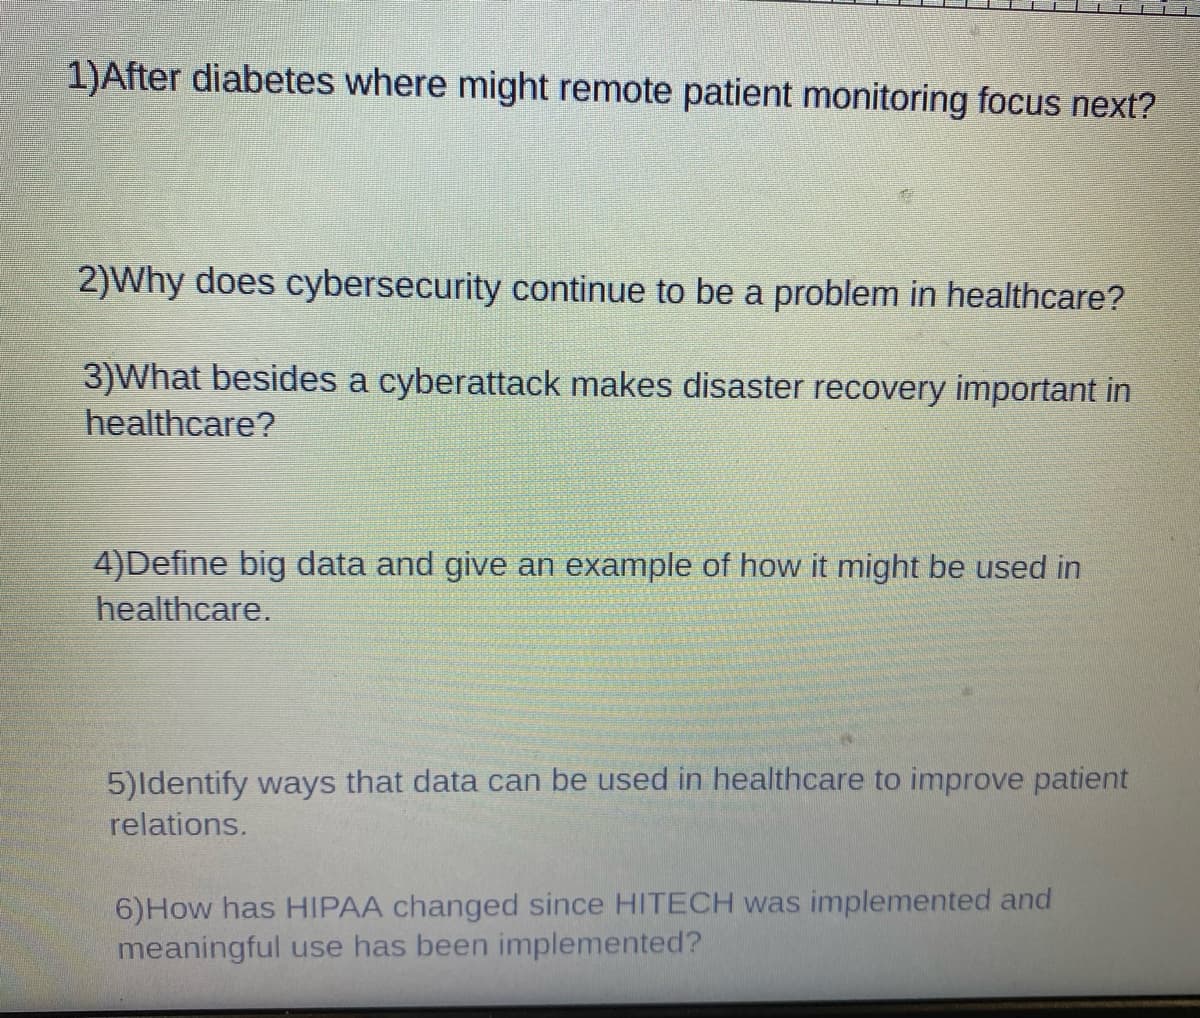 1)After diabetes where might remote patient monitoring focus next?
2)Why does cybersecurity continue to be a problem in healthcare?
3)What besides a cyberattack makes disaster recovery important in
healthcare?
4)Define big data and give an example of how it might be used in
healthcare.
5)Identify ways that data can be used in healthcare to improve patient
relations.
6) How has HIPAA changed since HITECH was implemented and
meaningful use has been implemented?